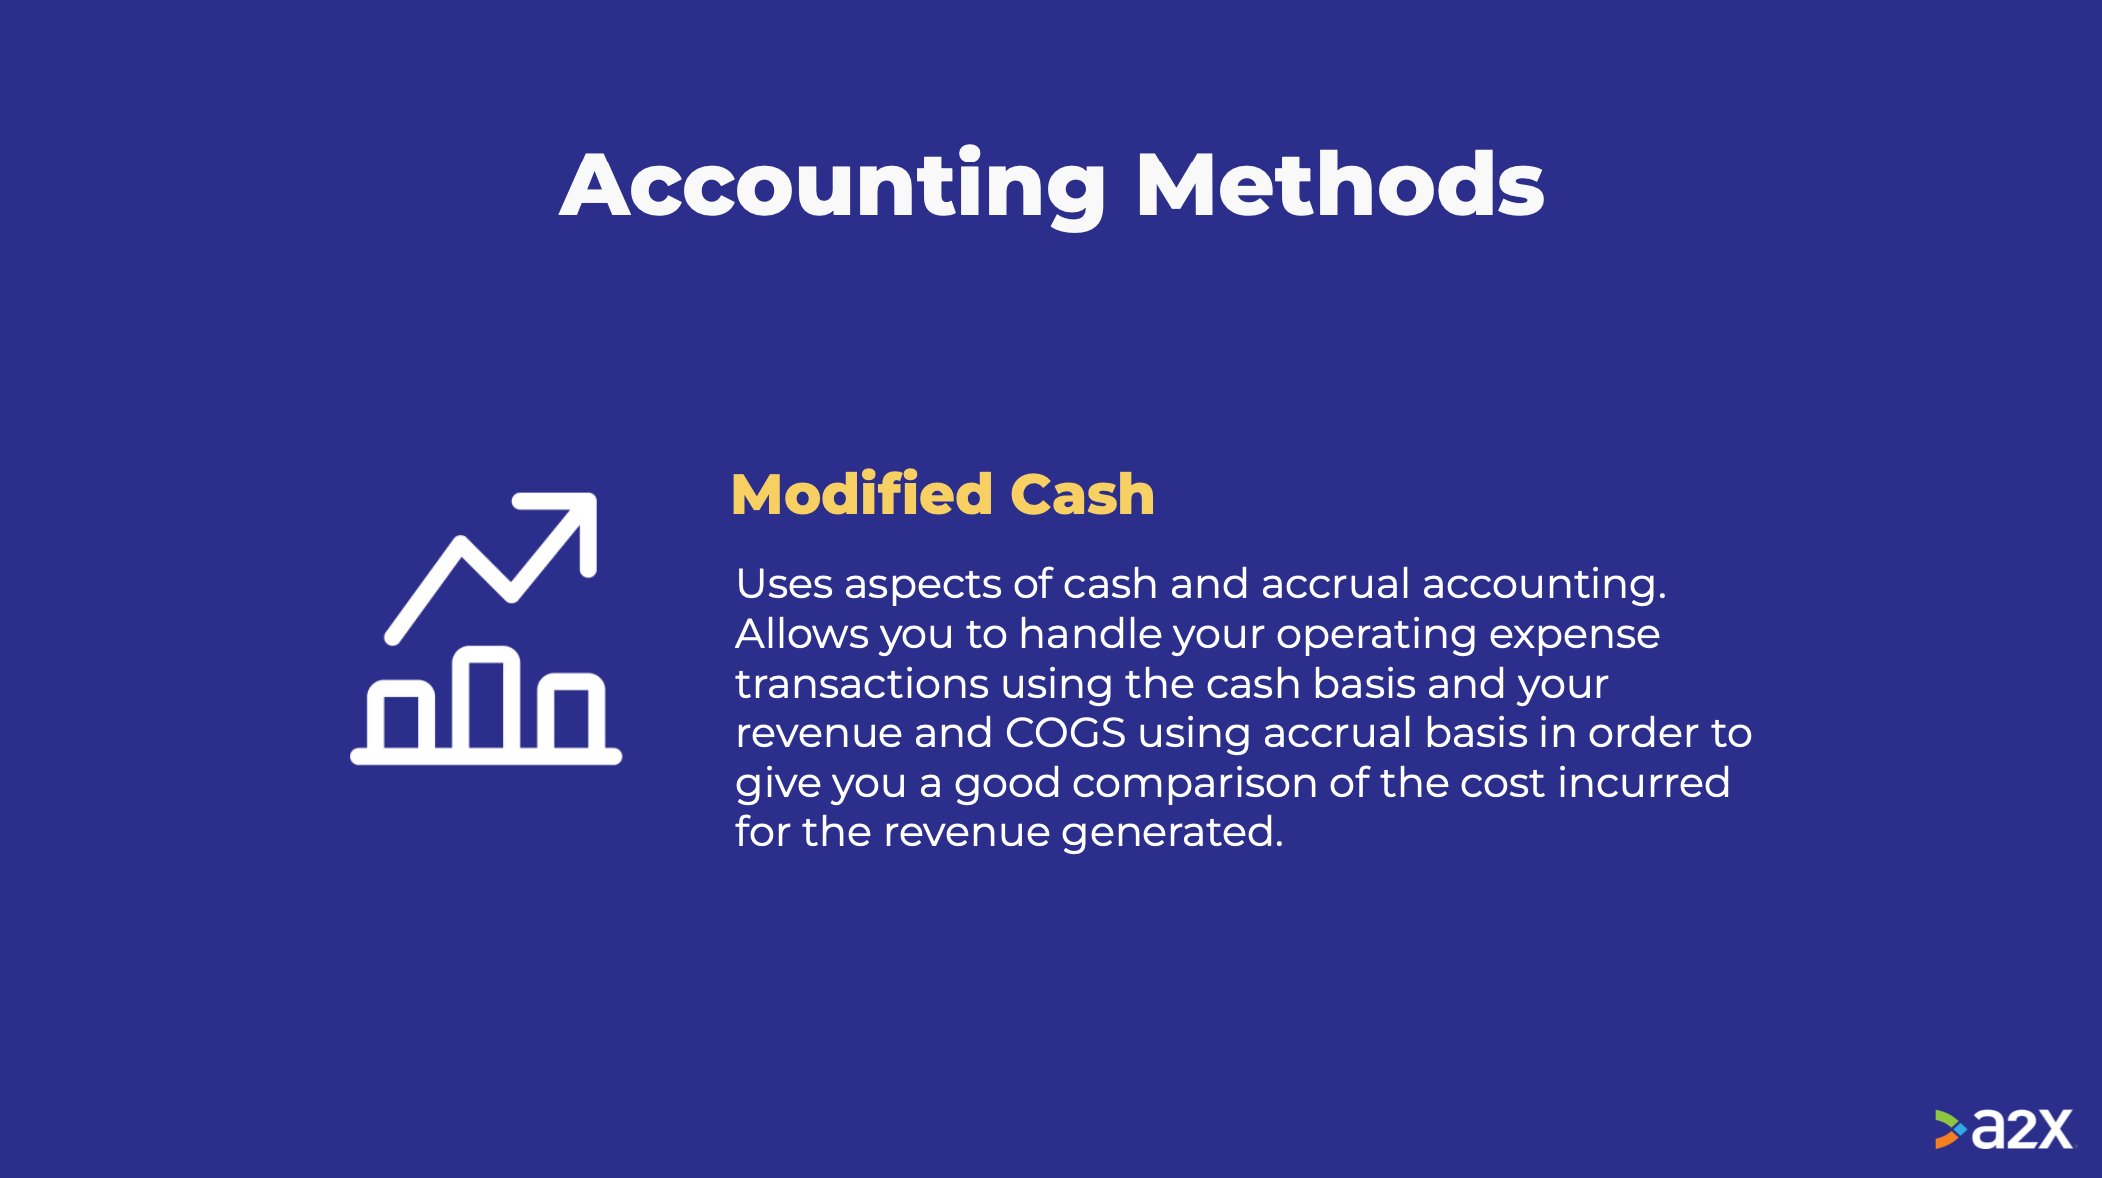 A quick explanation of what using modified cash allows you to do